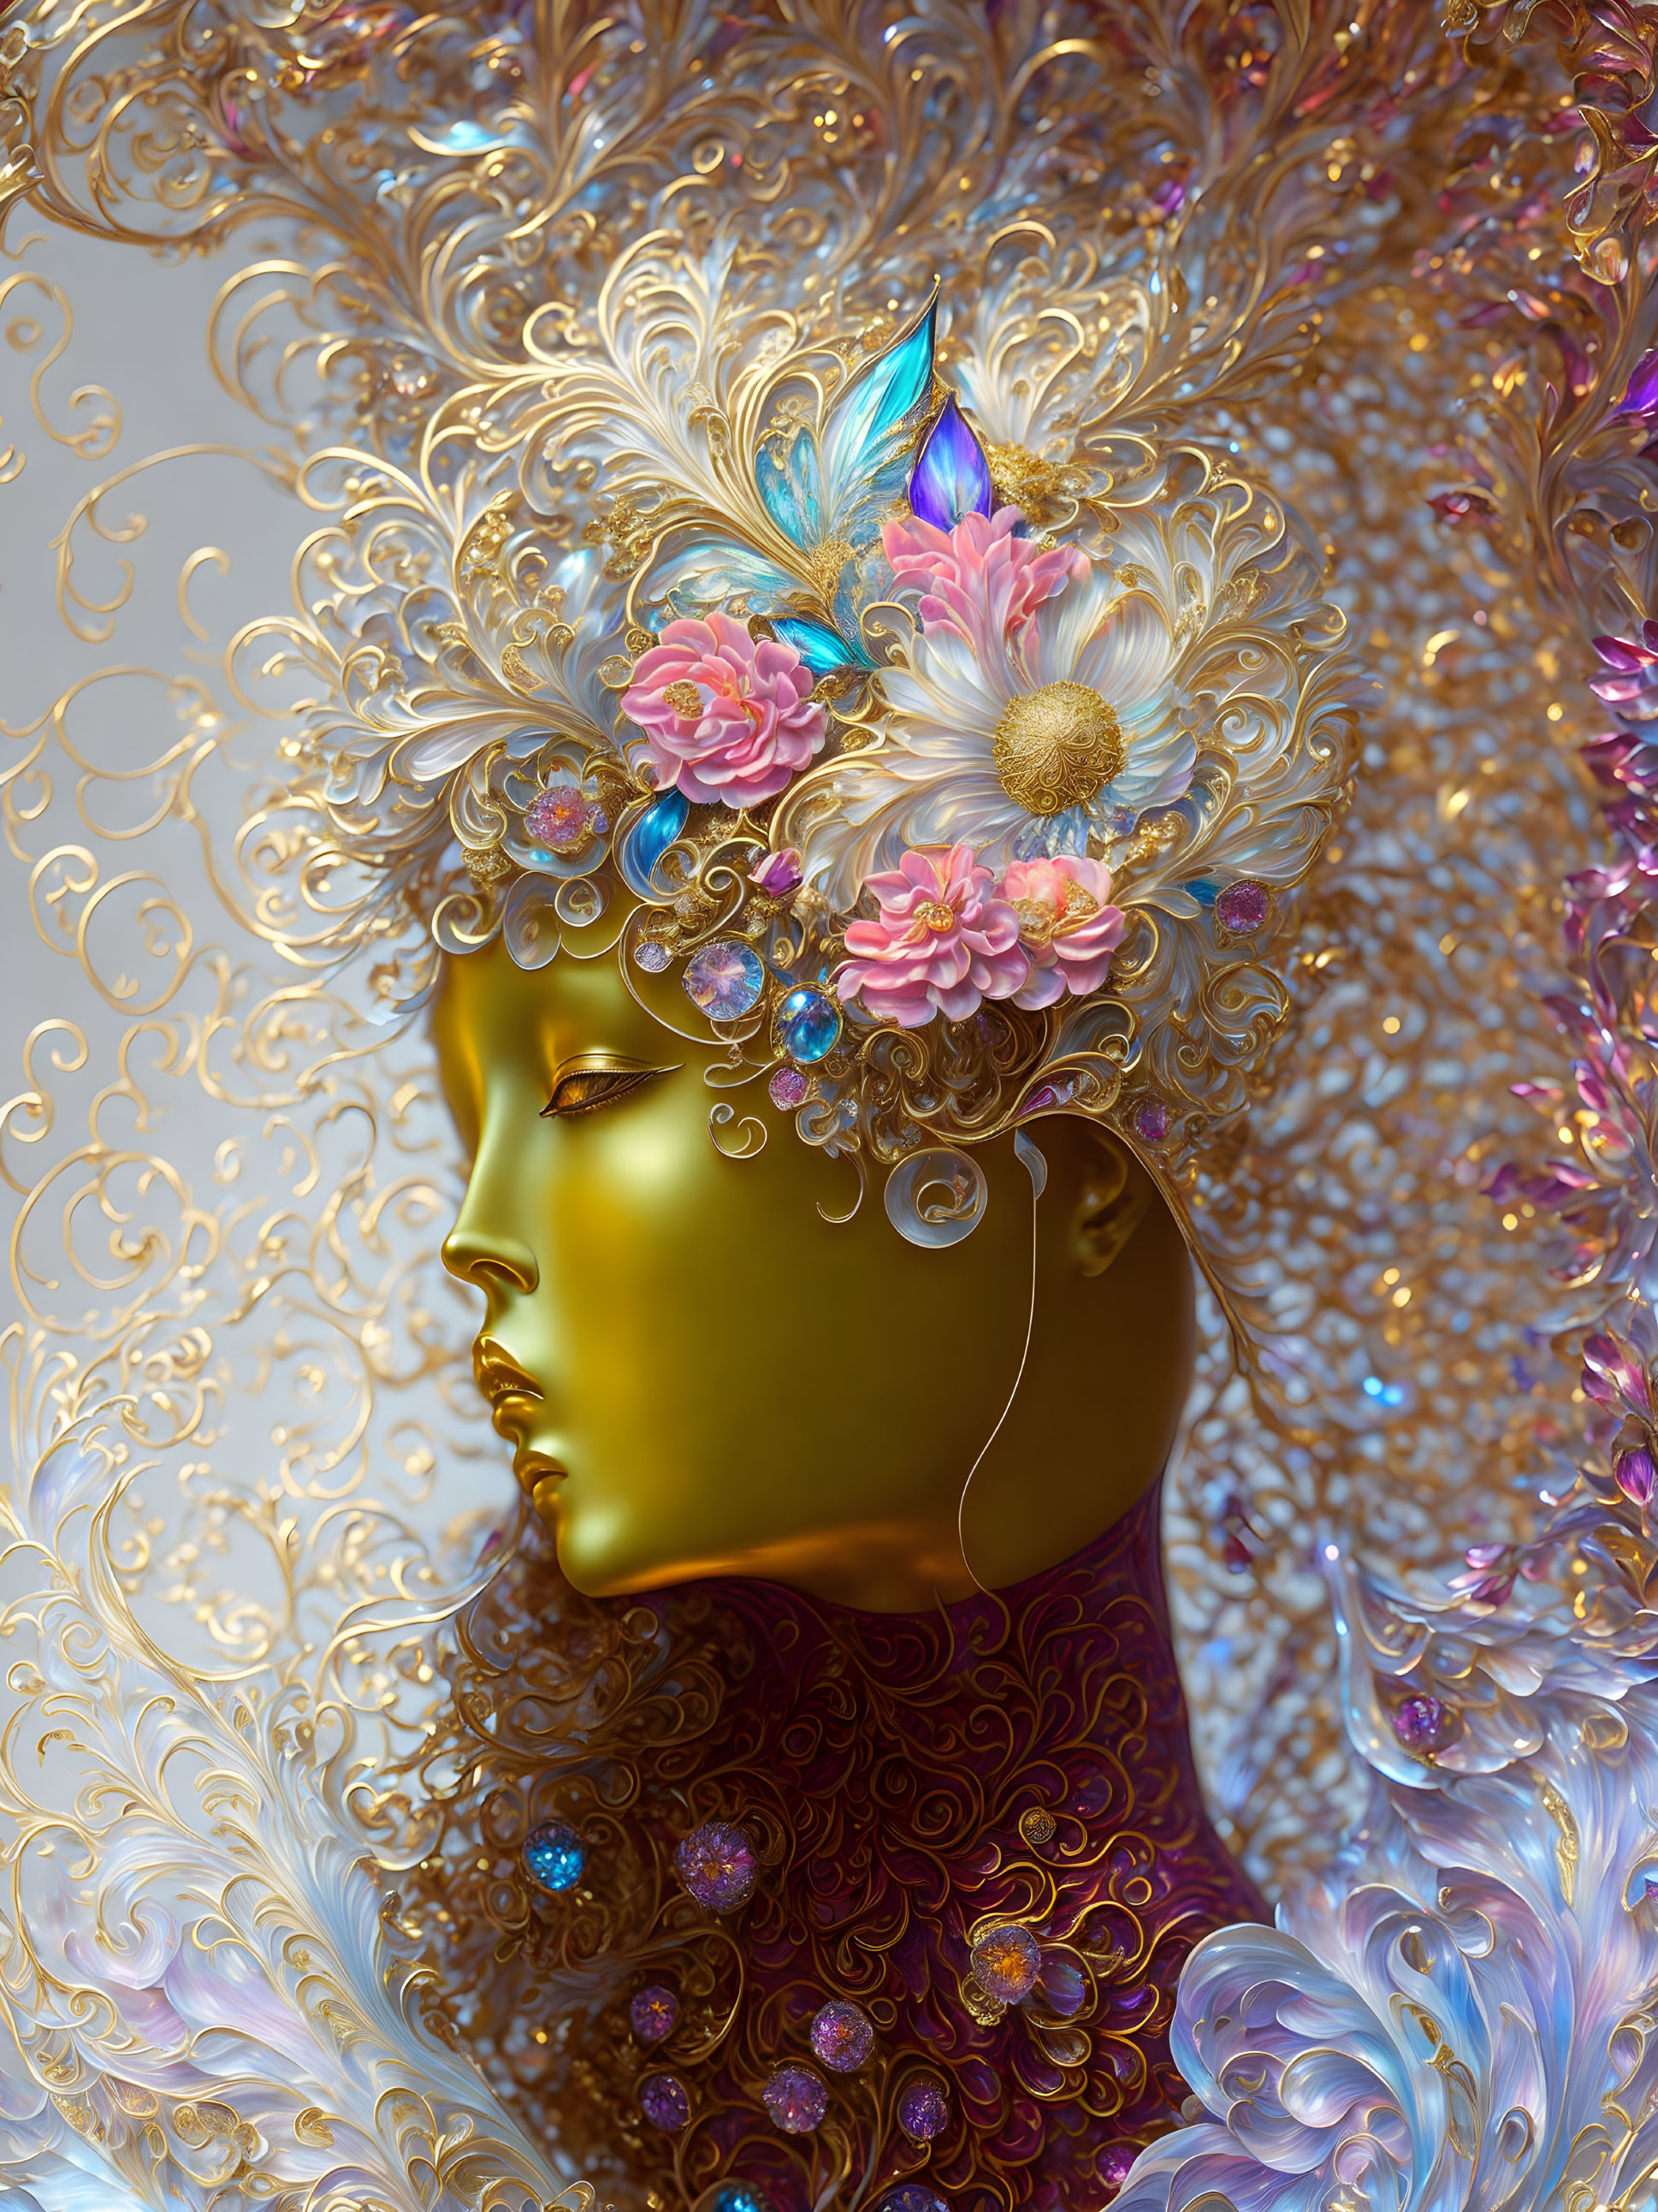 Golden ornate headpiece with swirling patterns, feathers, gemstones, and flowers on metallic face